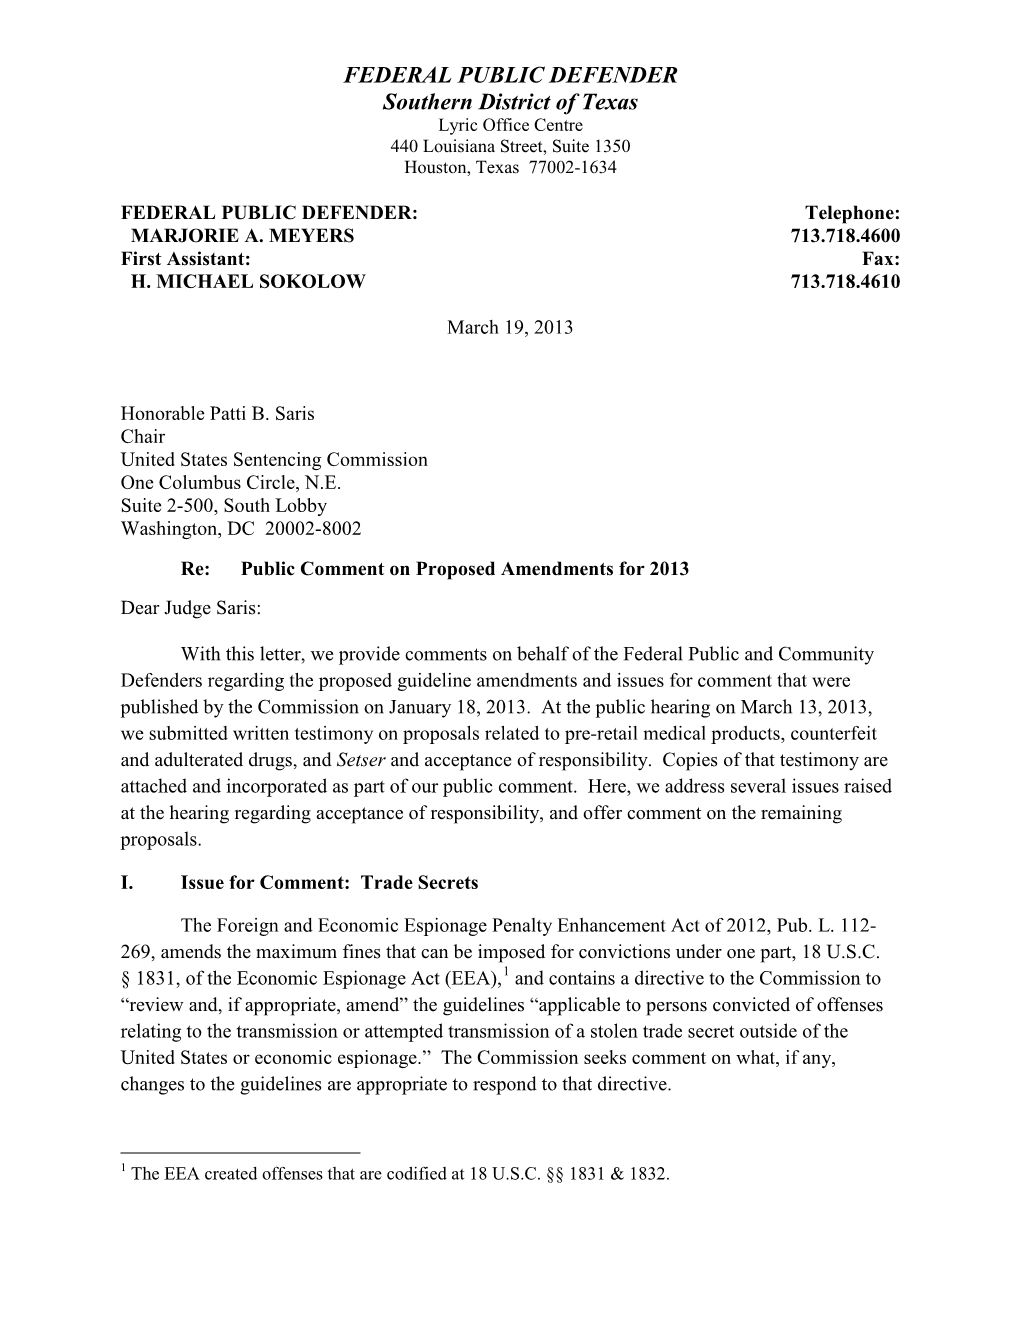 Federal Public and Community Defenders Regarding the Proposed Guideline Amendments and Issues for Comment That Were Published by the Commission on January 18, 2013